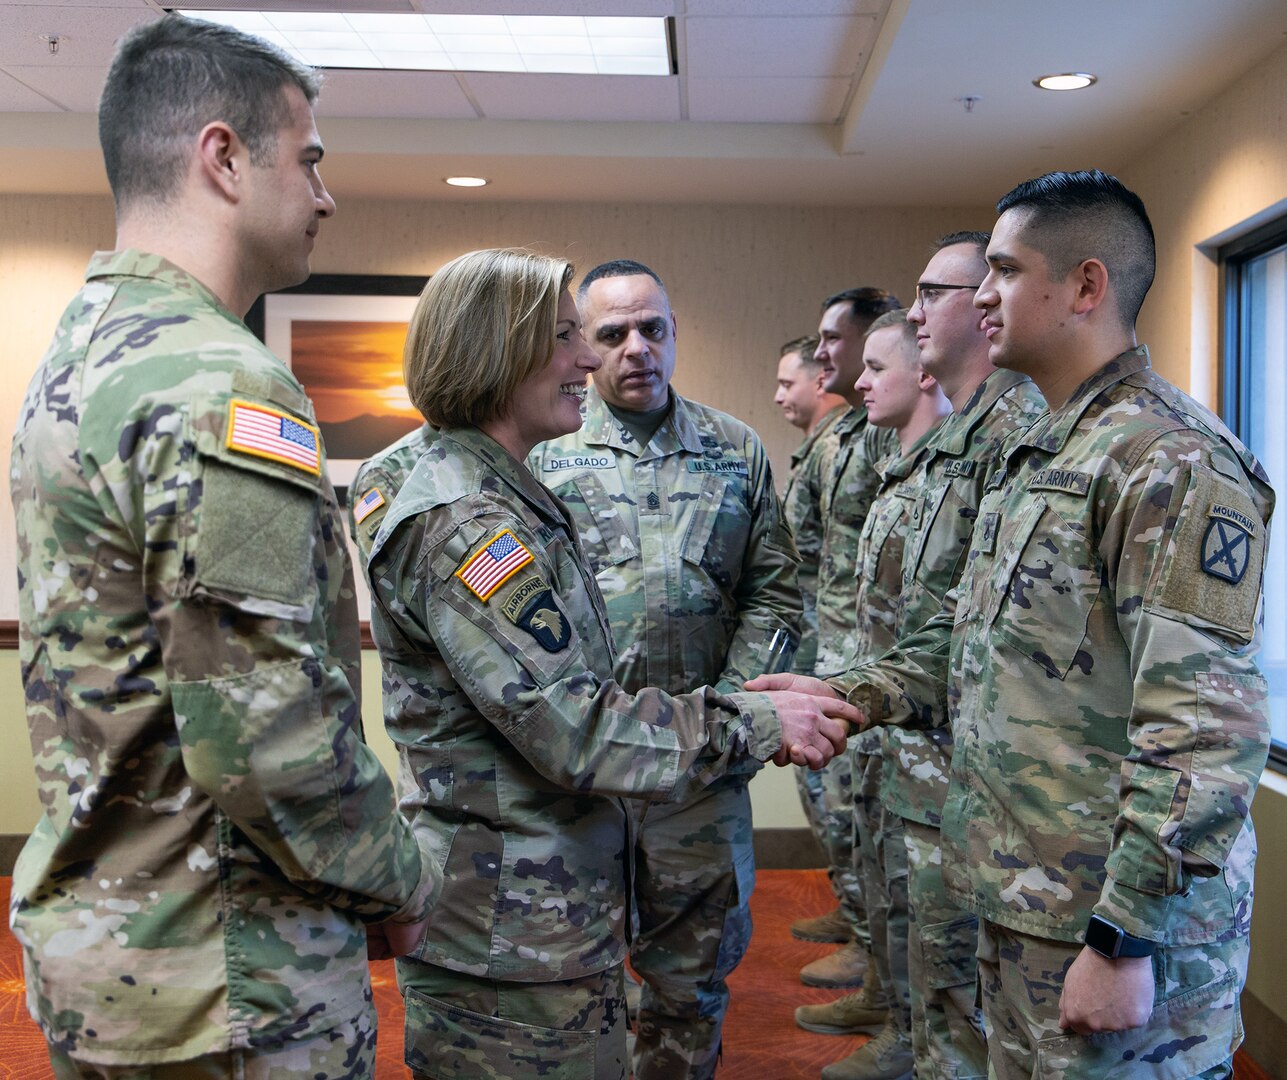 Lt. Gen. Laura J. Richardson, Commanding General, U.S. Army North, and Command Sgt. Major Alberto Delgado, ARNORTH Senior Enlisted Advisor, recognize a group of Soldiers assigned to Bravo Company, 2nd Infantry Battalion, 4th Infantry Regiment, 3rd Brigade Combat Team, 10th Mountain Division for their hard work during their visit to service members working along the U.S. southern border in Tucson, Arizona Nov. 26.